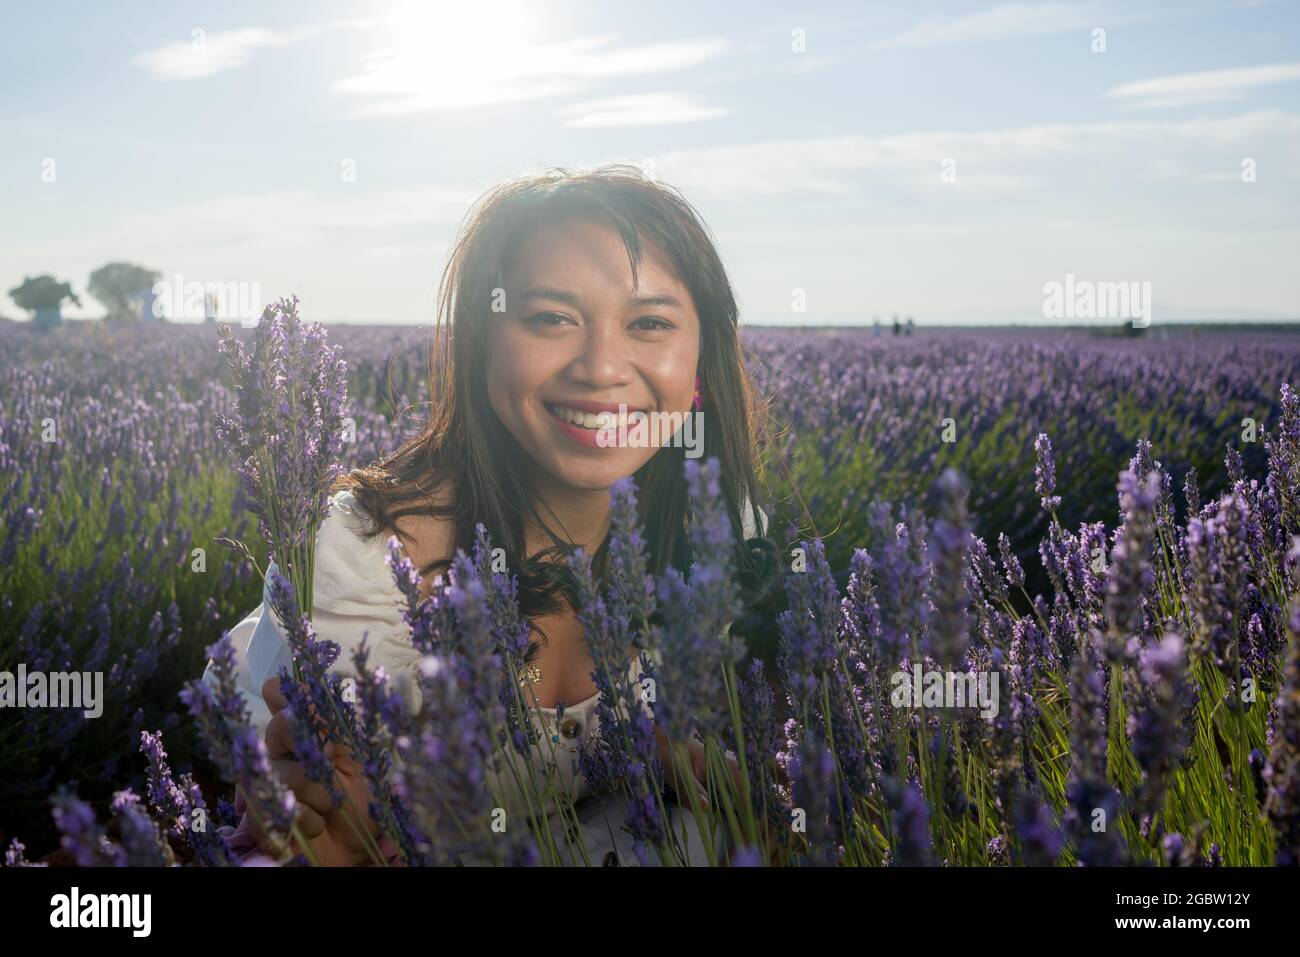 outdoors romantic portrait of young happy and attractive woman in white summer dress enjoying carefree at beautiful lavender flowers field in travel a Stock Photo